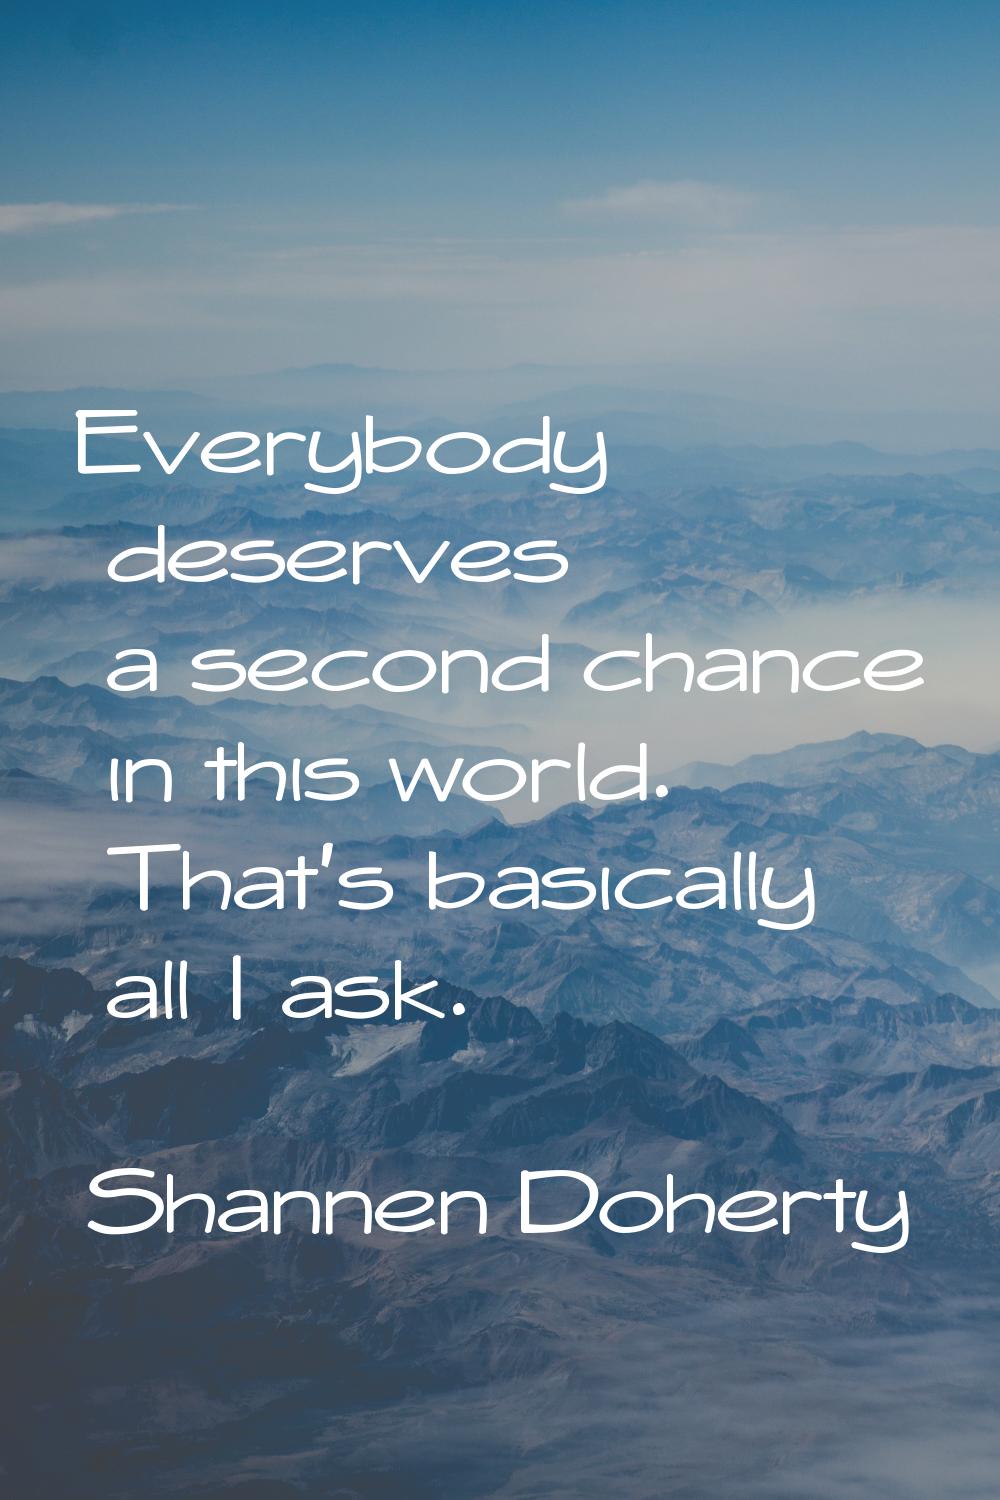 Everybody deserves a second chance in this world. That's basically all I ask.